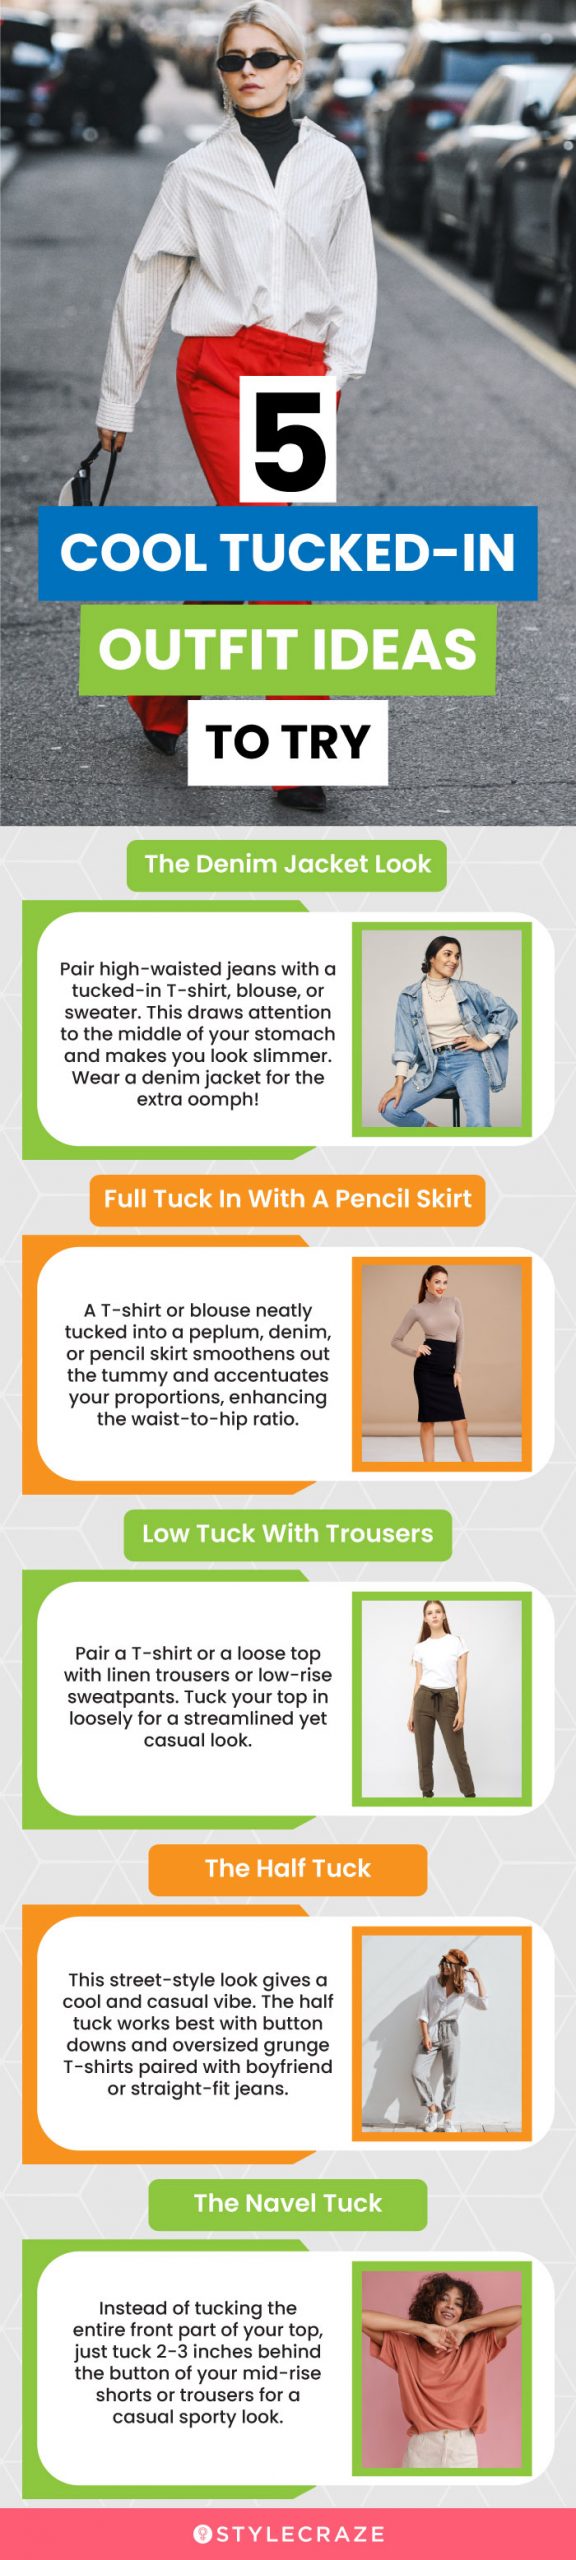 5 cool tucked in outfit ideas to try (infographic)